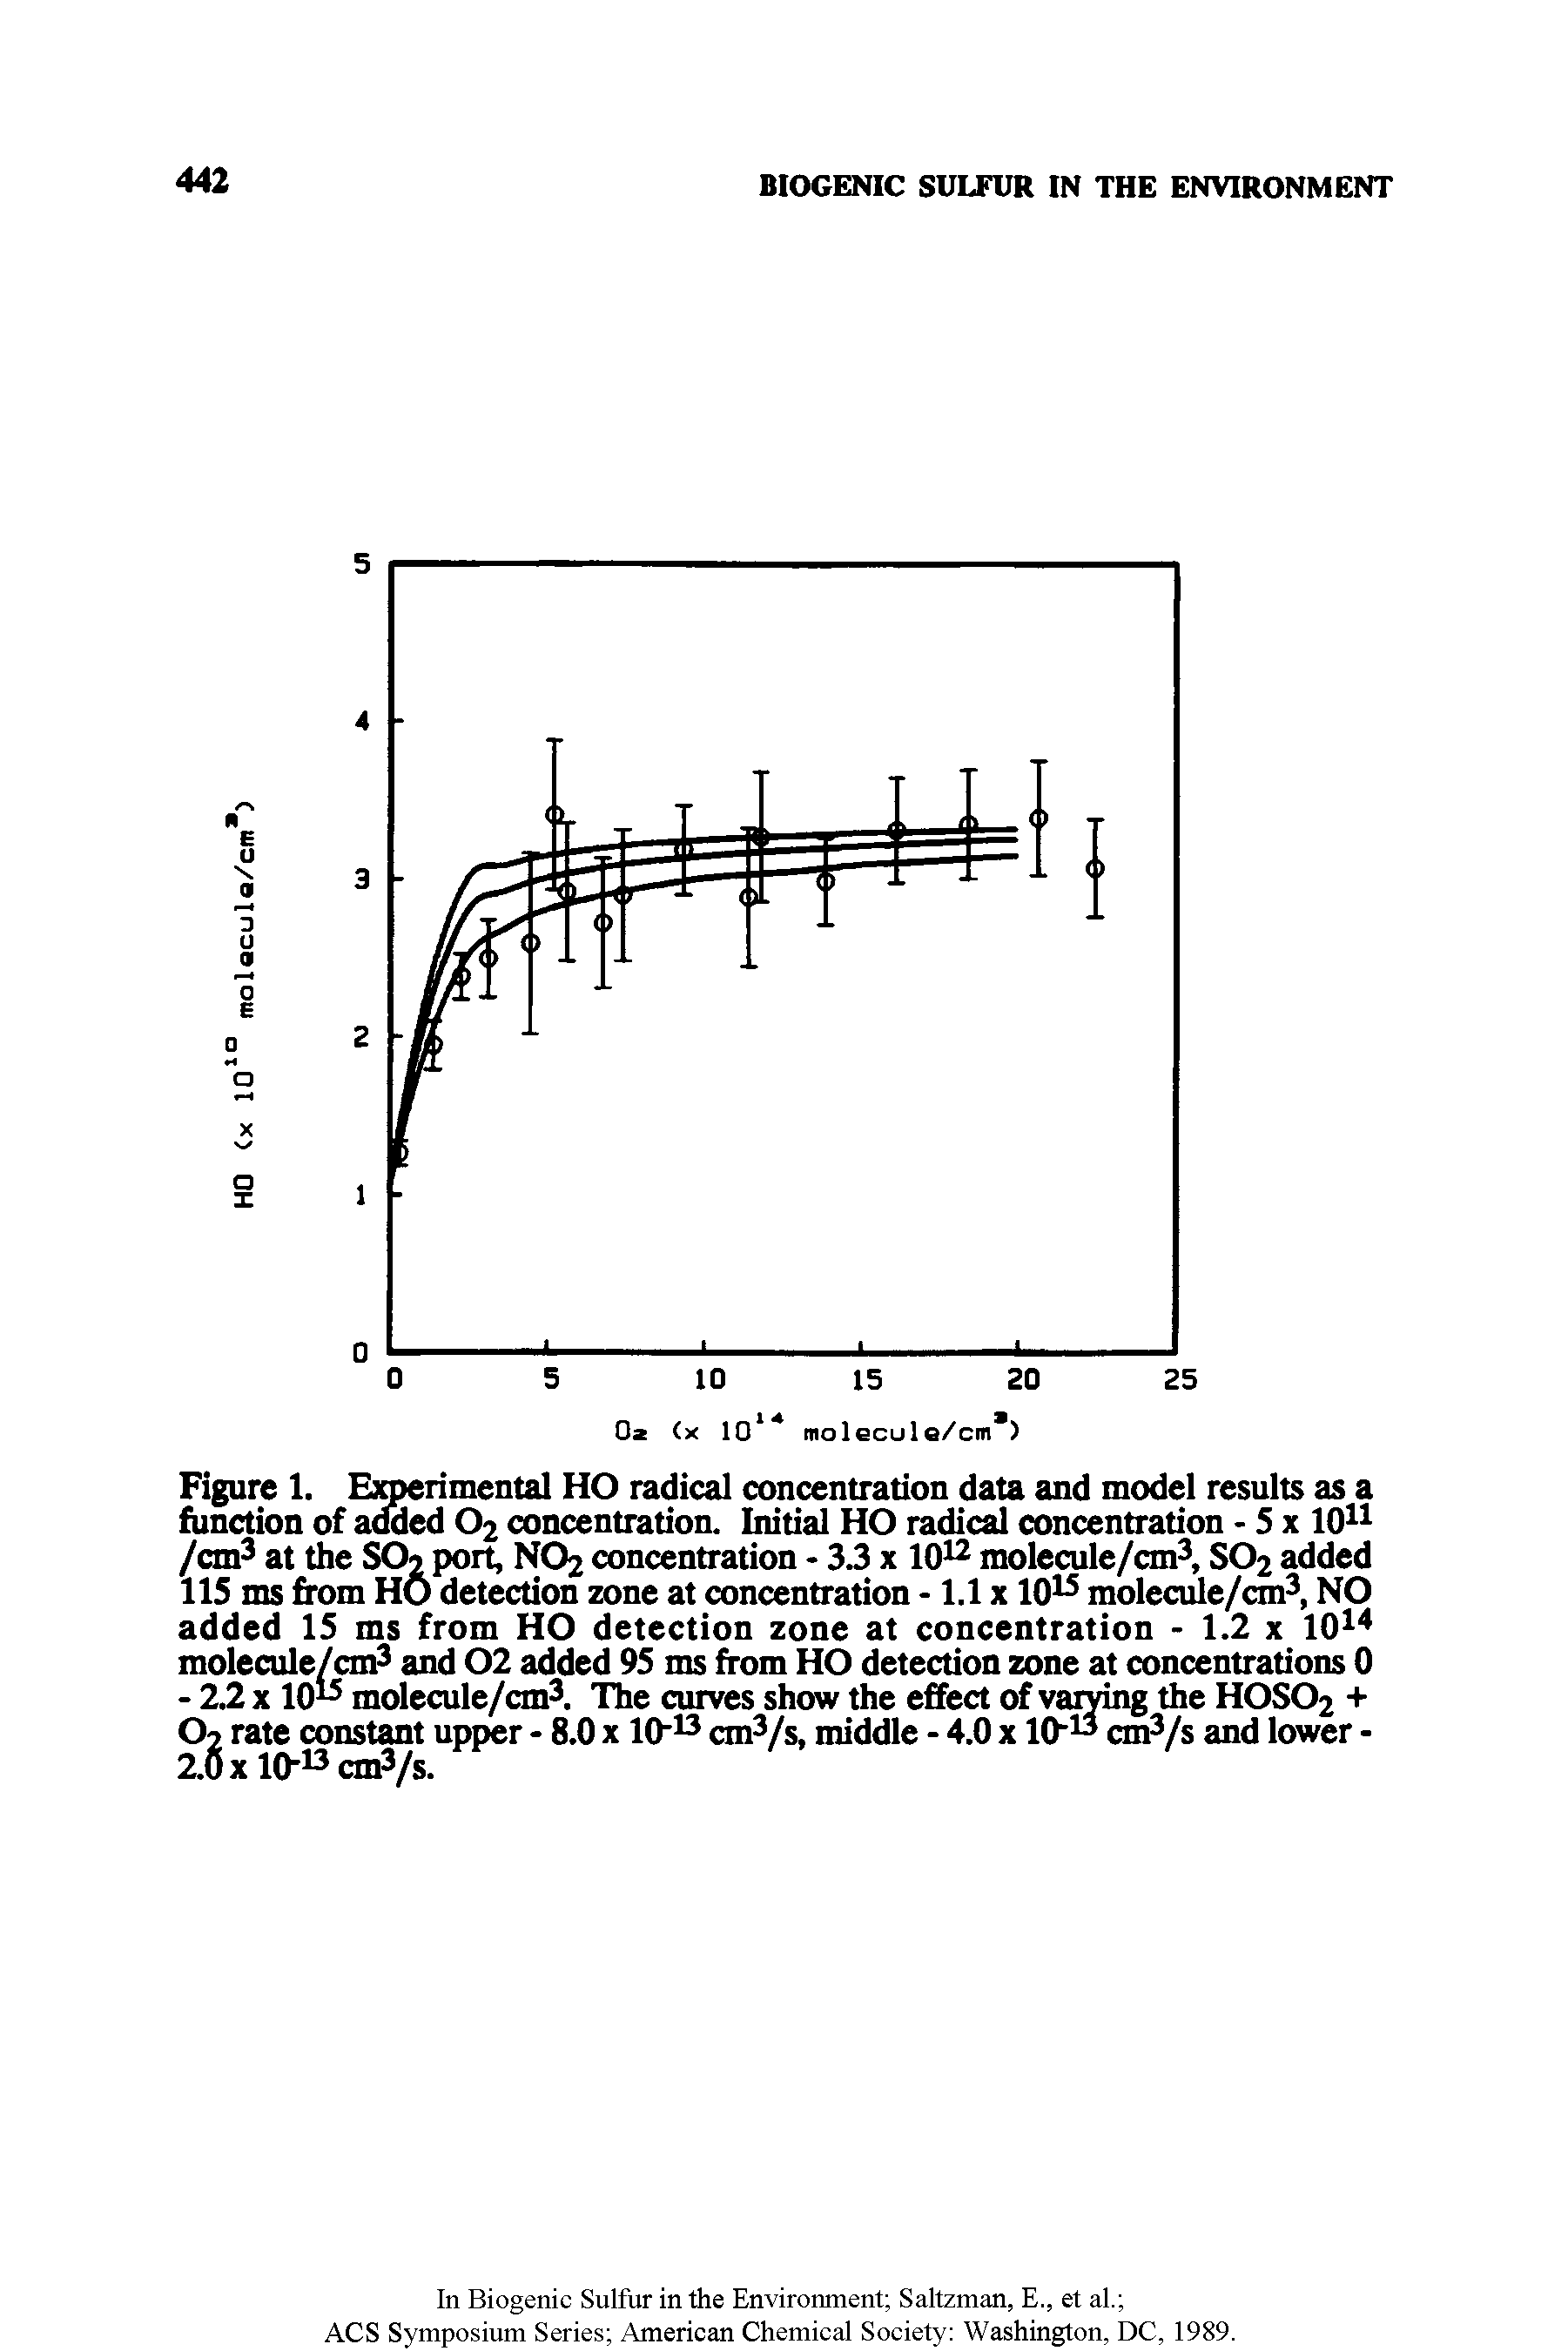 Figure 1. Experimental HO radical concentration data and model results as a function of added O2 concentration. Initial HO radical concentration - 5 x 1011 /cm3 at the SOj> port, NO2 concentration - 3.3 x 1012 molecule/cm3, SO2 added 115 ms from HO detection zone at concentration -1.1 x 1015 molecule/cm3, NO added 15 ms from HO detection zone at concentration - 1.2 x 1014 molecule/cm3 and 02 added 95 ms from HO detection zone at concentrations 0 - 2.2 x 10 5 molecule/cm3. The curves show the effect of varying the HOSO2 + O2 rate constant upper - 8.0 x Iff13 cm3/s, middle - 4.0 x 10"13 cm3/s and lower -2.0 x 10"13 cm3/s.